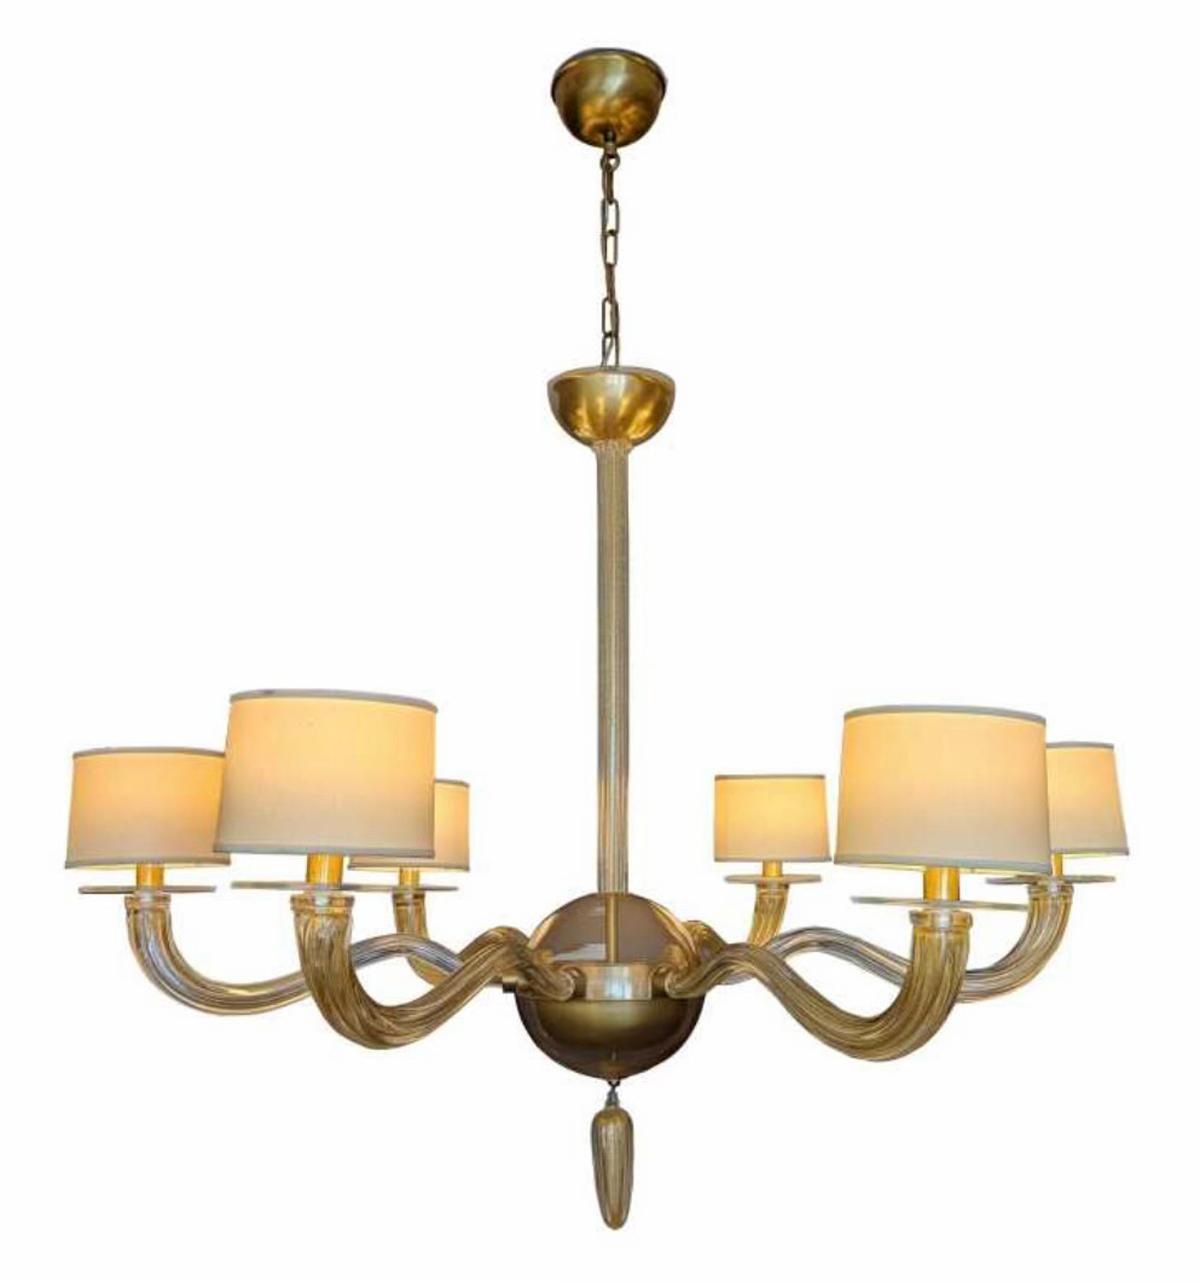 Elegant hand blown murano glass chandelier, designed by Barbara Barry for Baker, made in Italy, circa 2010. The original retail price was $16,000 from Baker. This example has never been used. It has all of the mounting hardware and is ready to